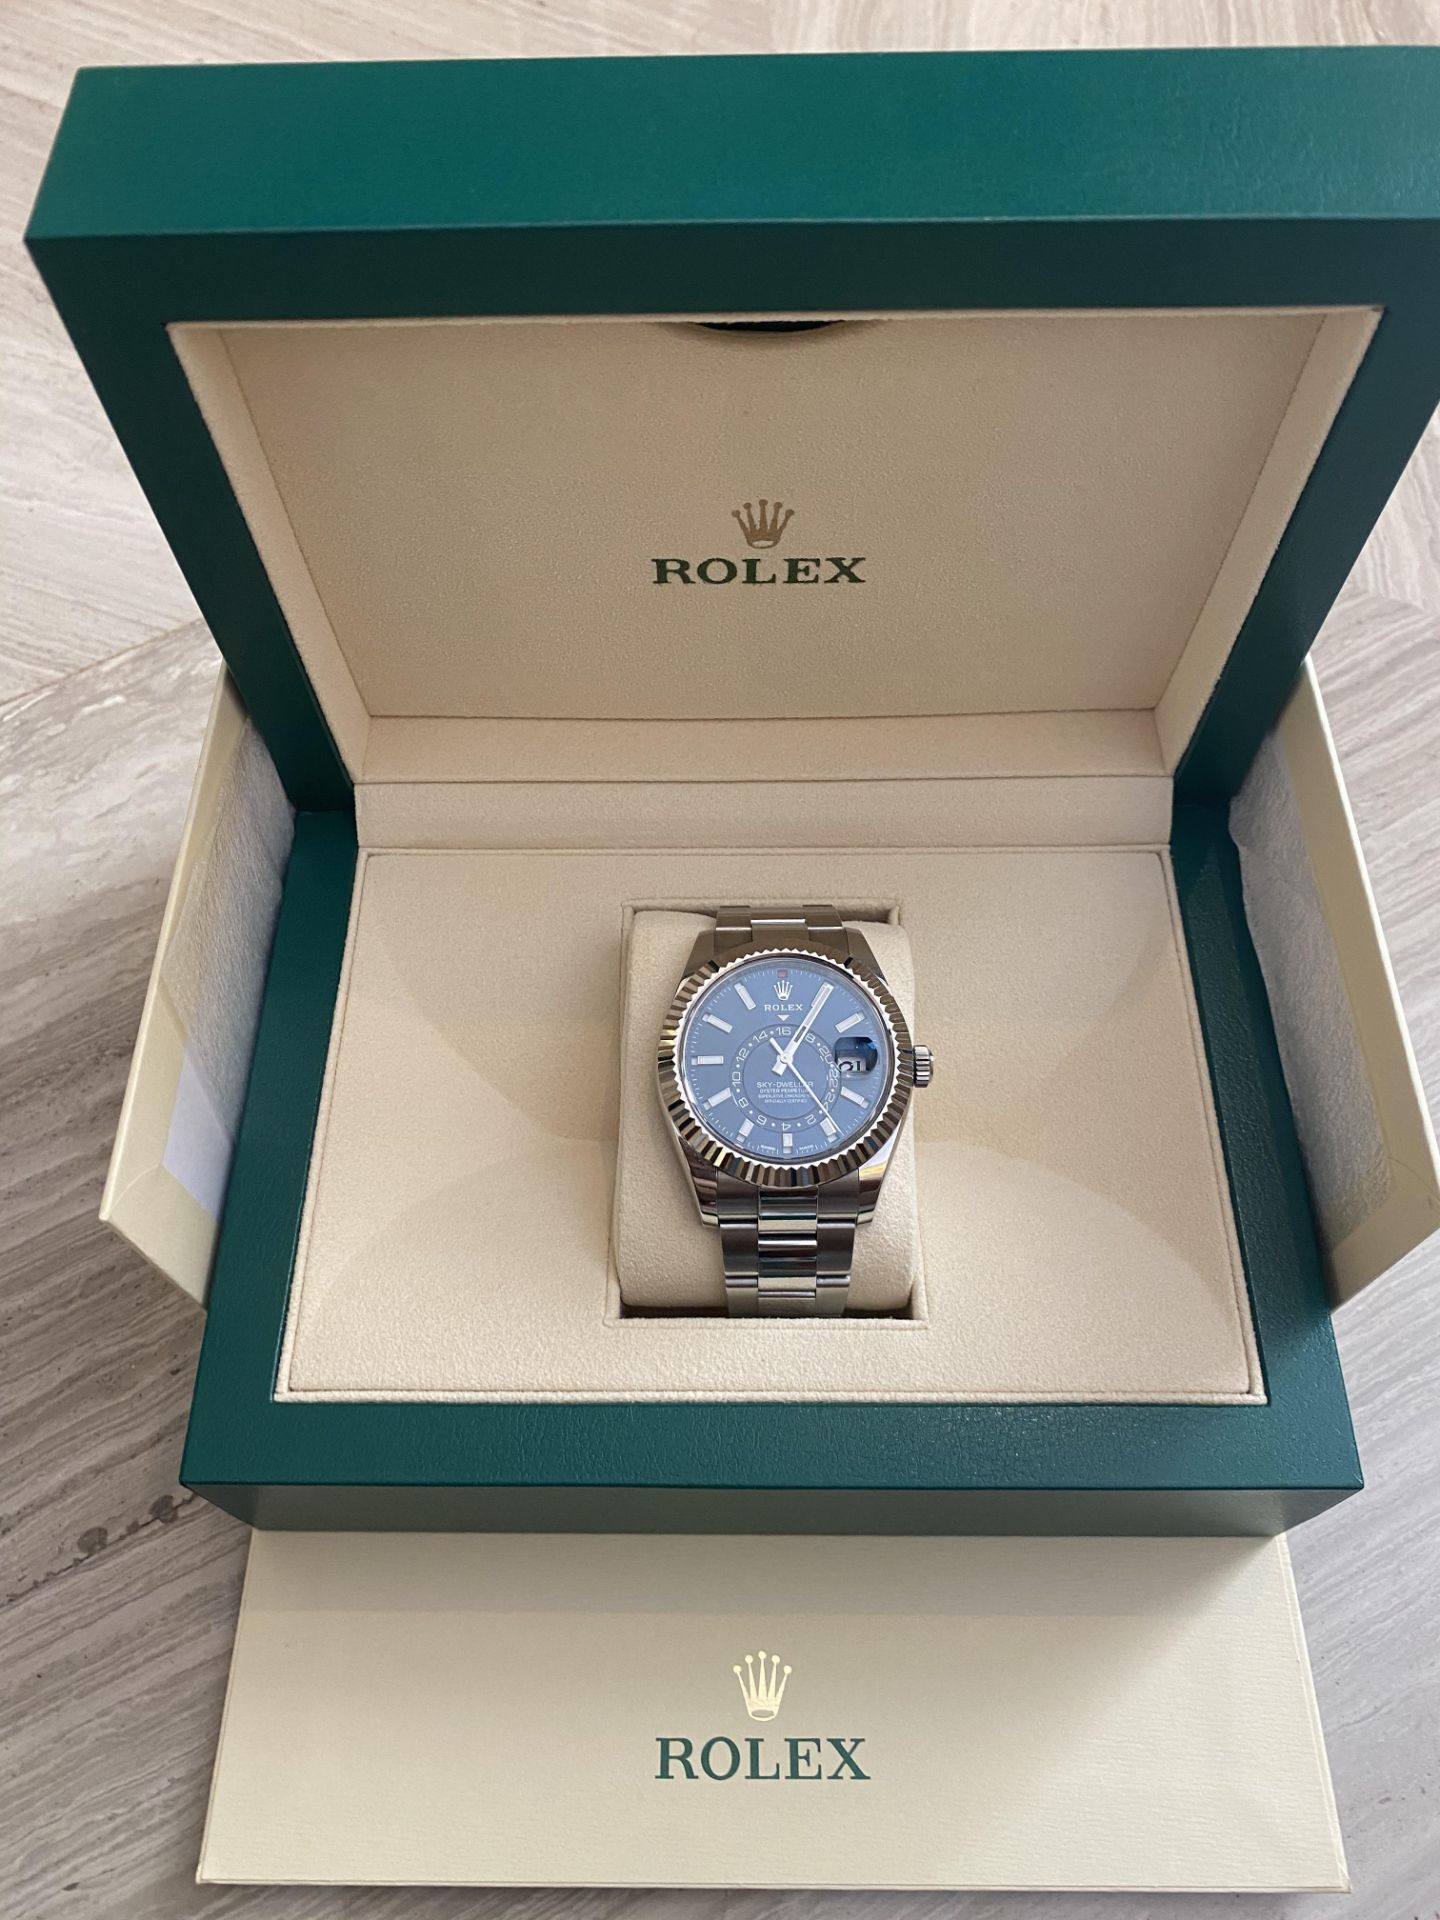 2018 ROLEX SKY DWELLER OYSTER 42MM OYSTERSTEEL & WHITE GOLD **BLUE DIAL** - Image 4 of 12